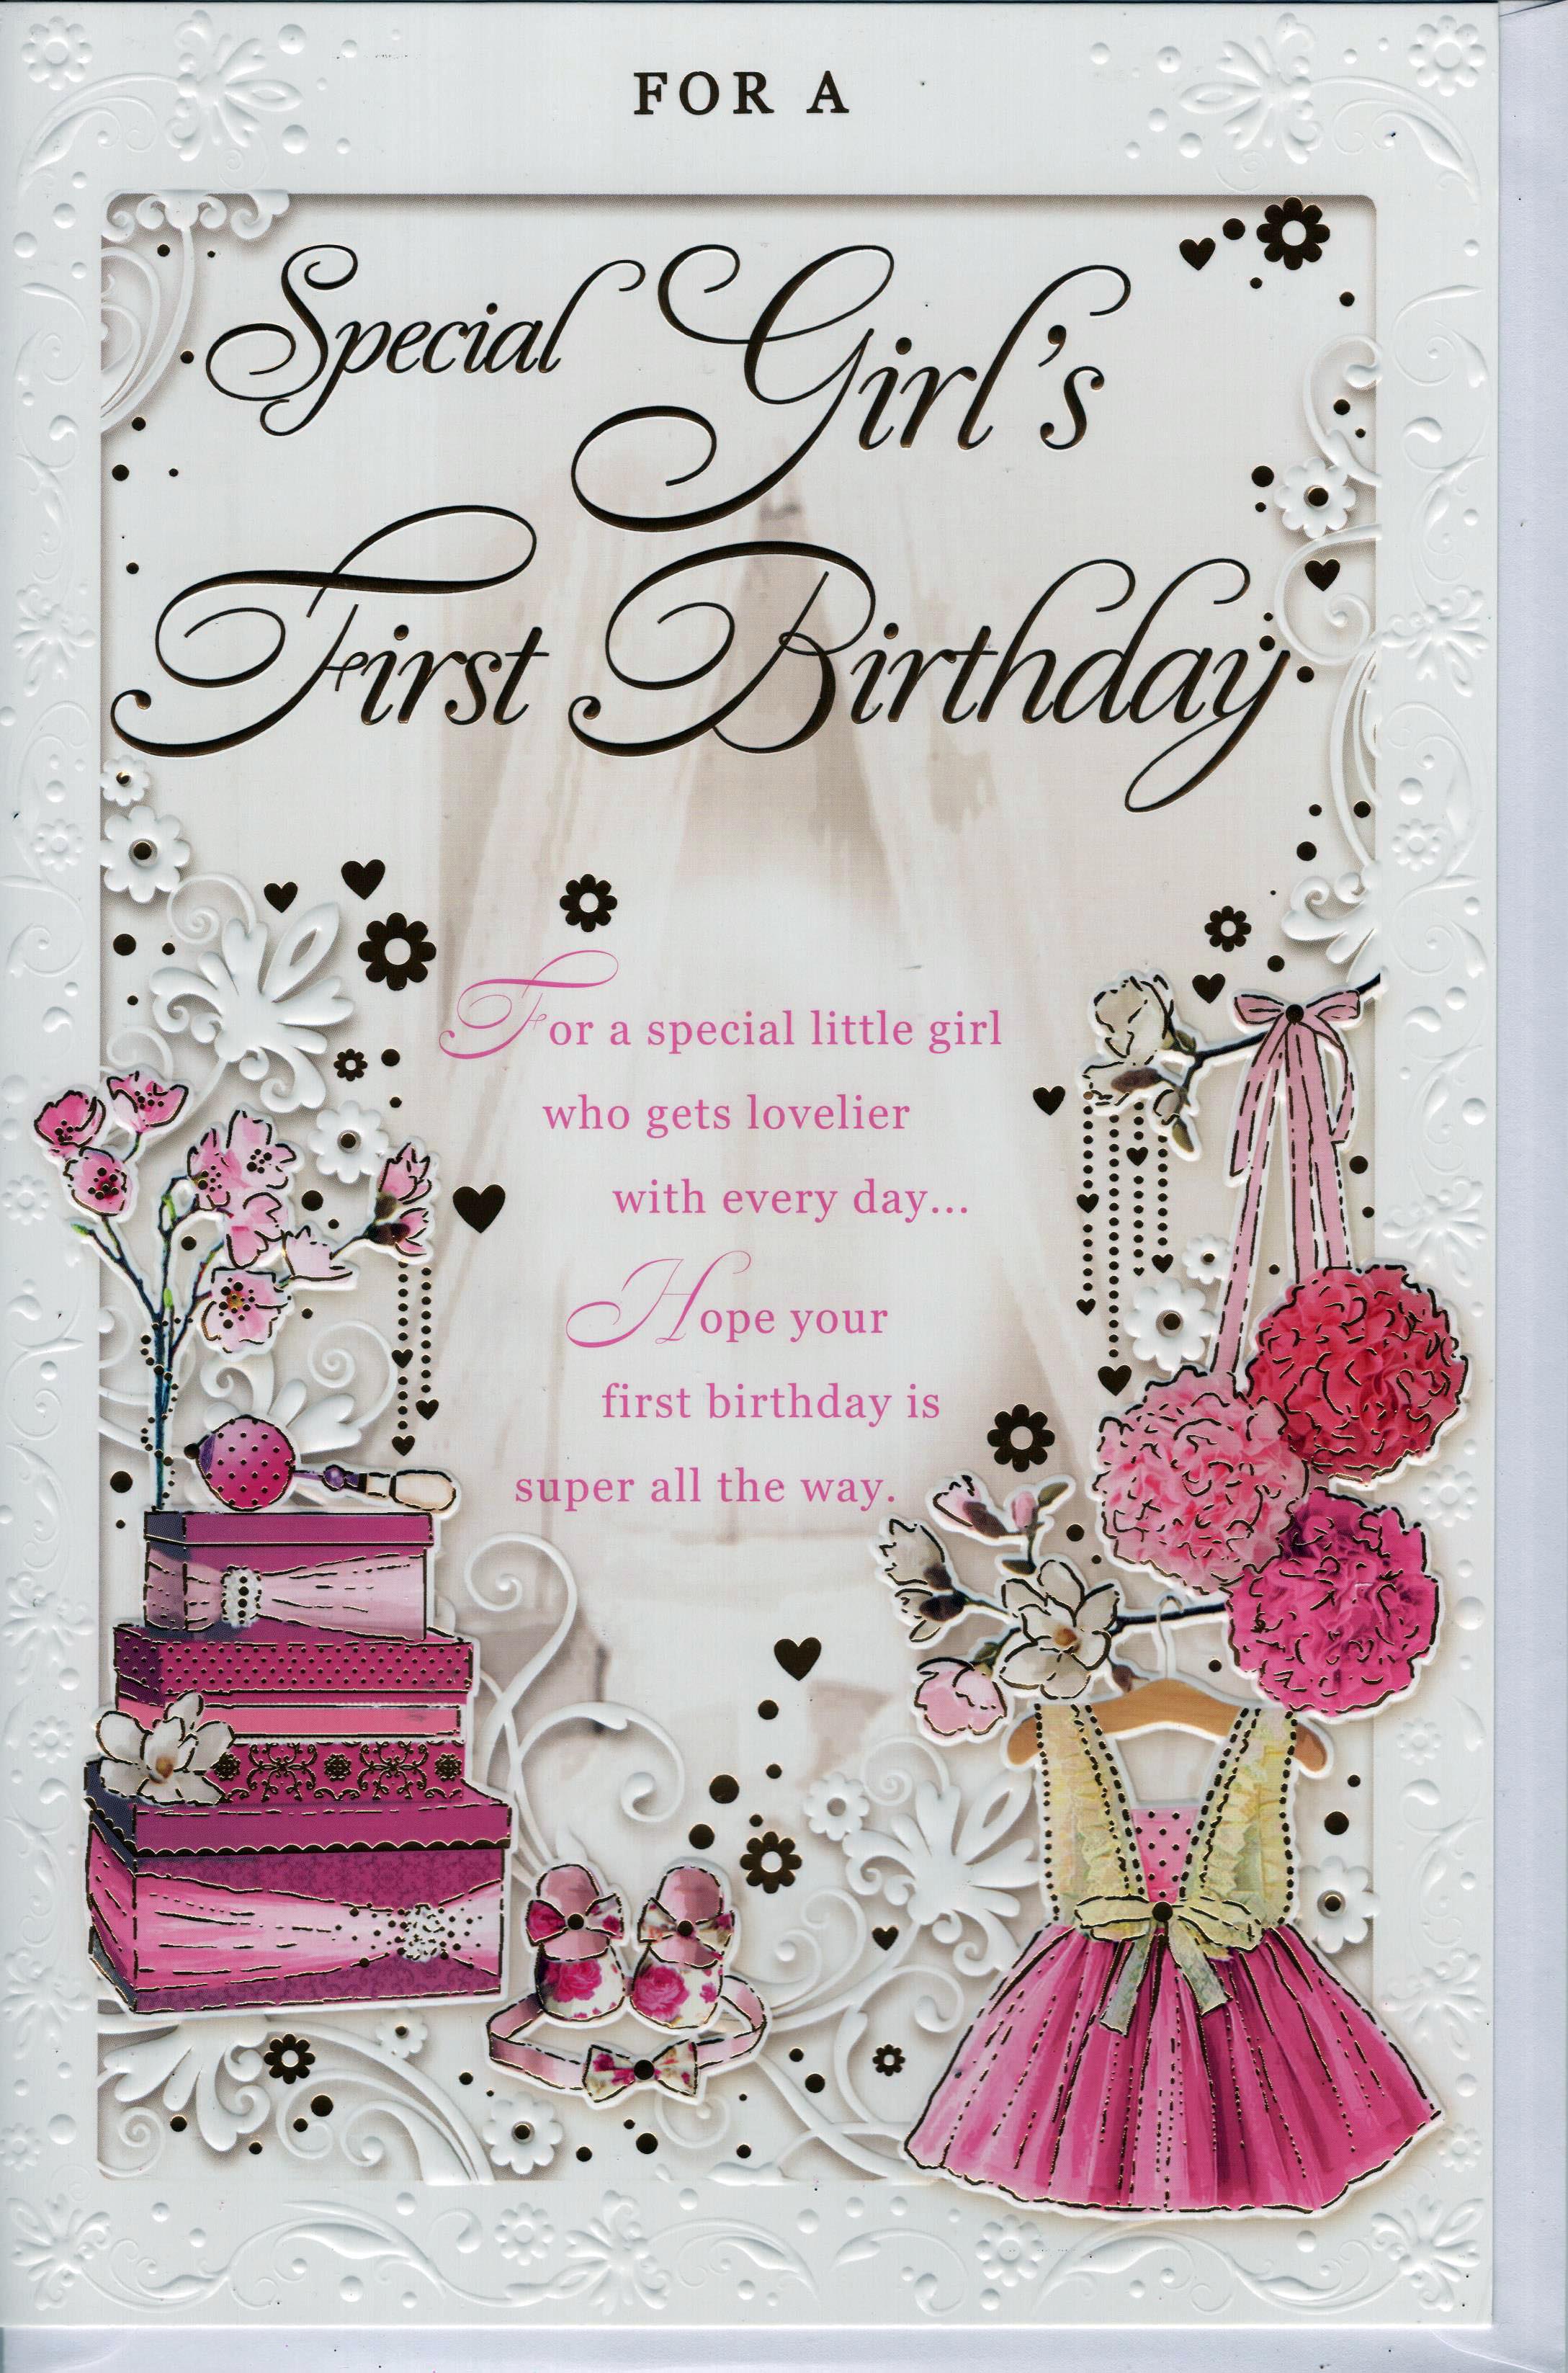 For a Special Girl's First Birthday